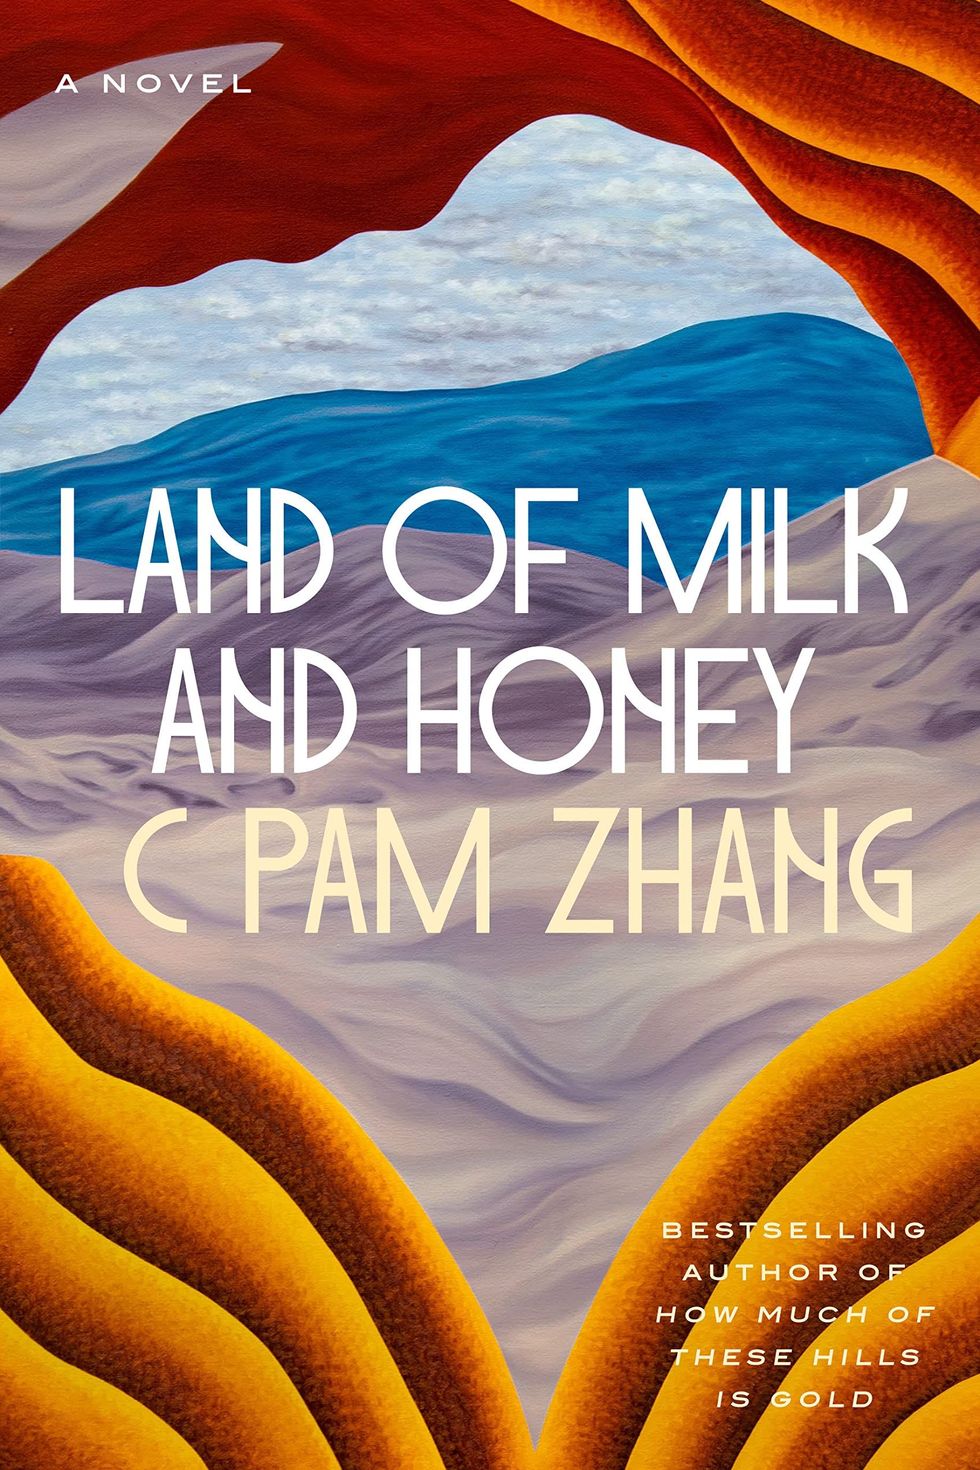 'Land of Milk and Honey' by C Pam Zhang